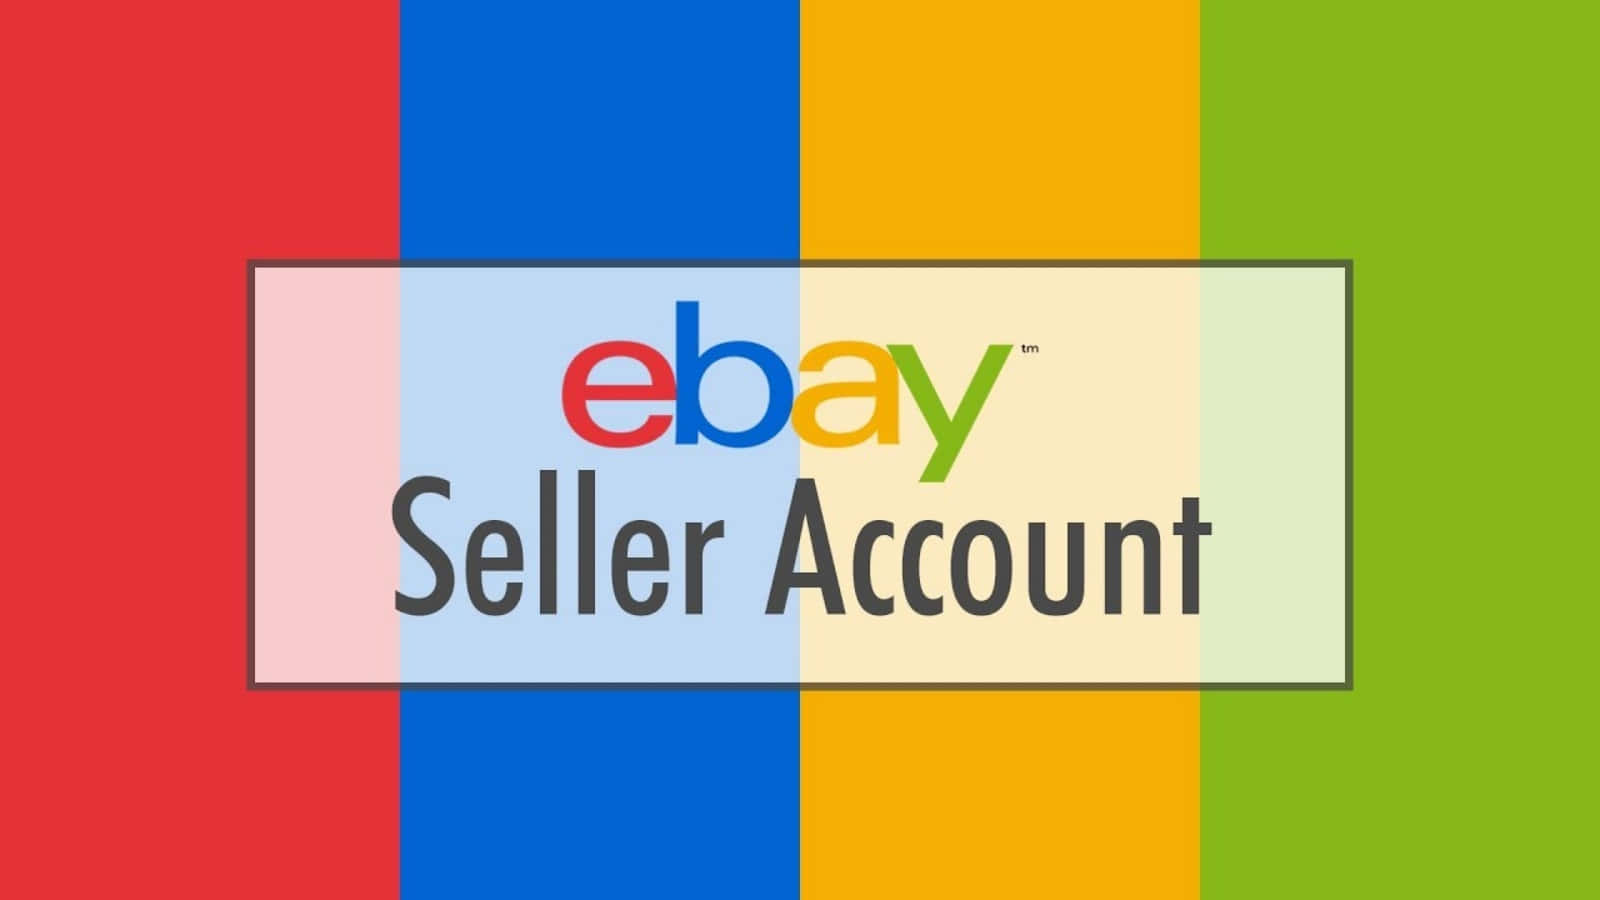 Shop Alternative and Unusual Products on Ebay